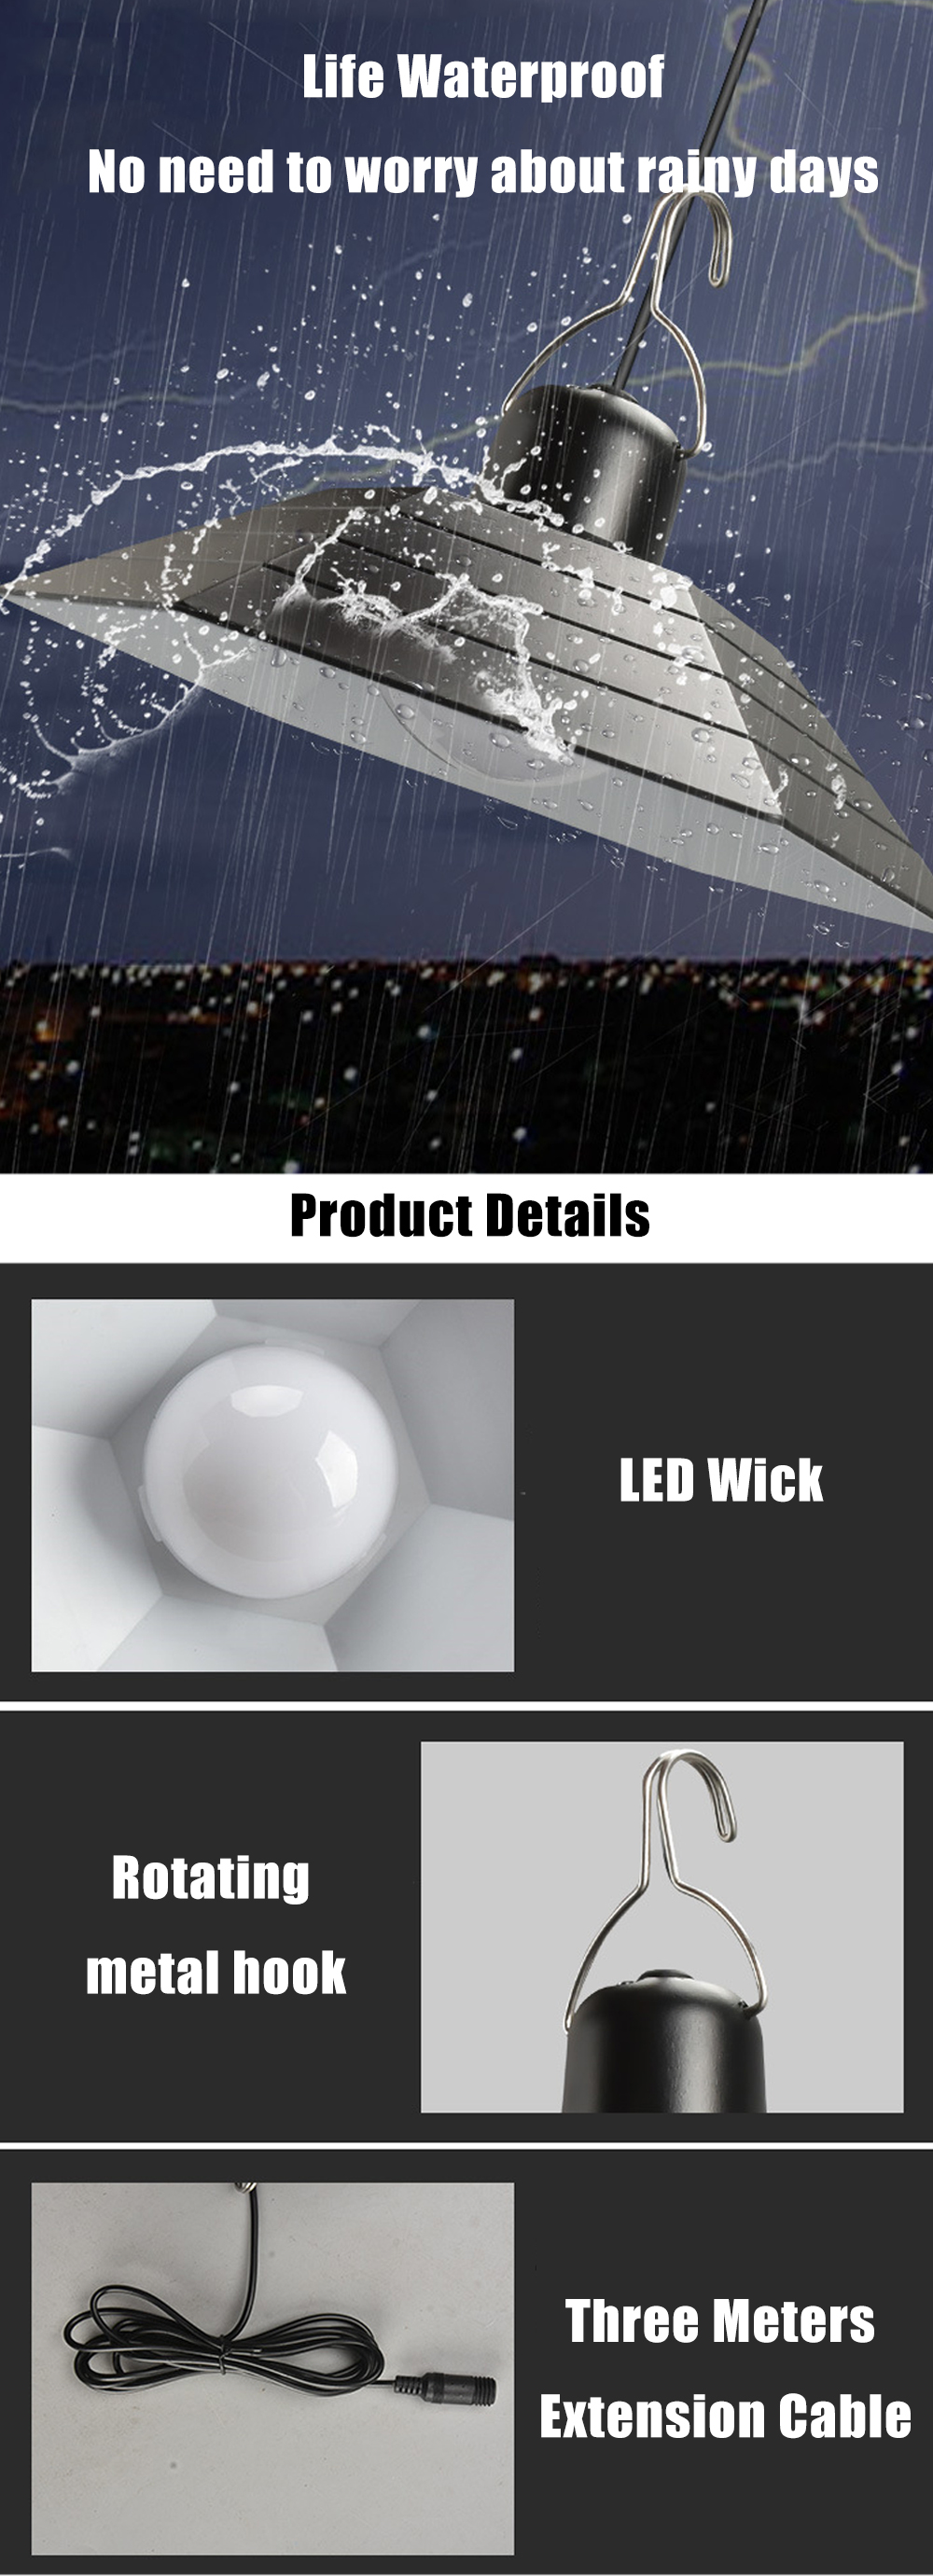 IPReereg-50W-37V-Solar-Light-600LM-IP65-Waterproof-LED-Bulb-Light-with-Remote-Control-For-Outdoor-Ca-1902275-3